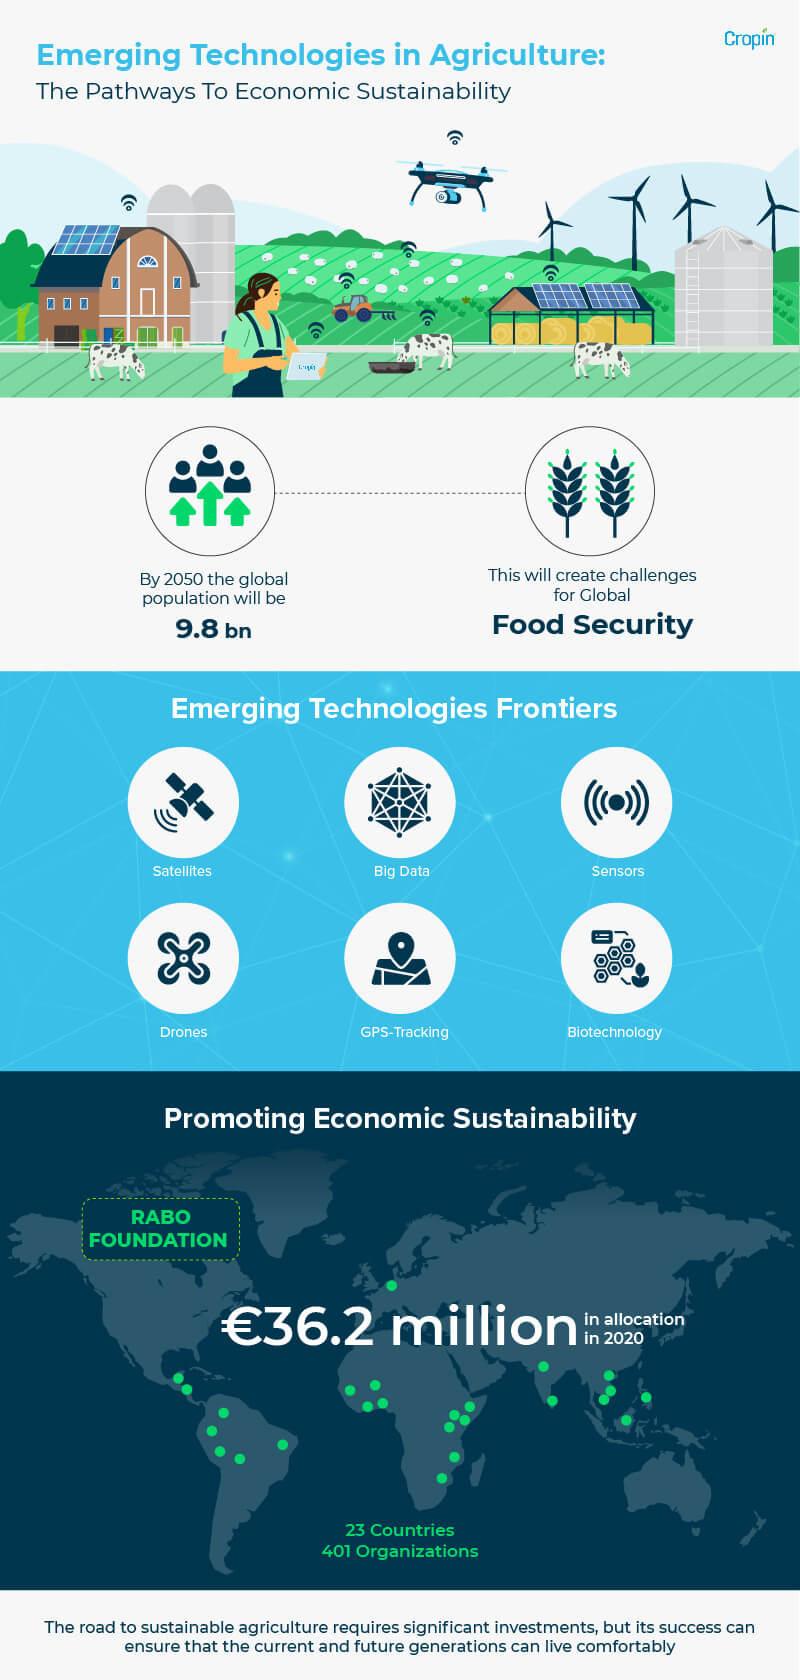 new technologies in agriculture infographic denoting the emerging technology frontiers in agriculture